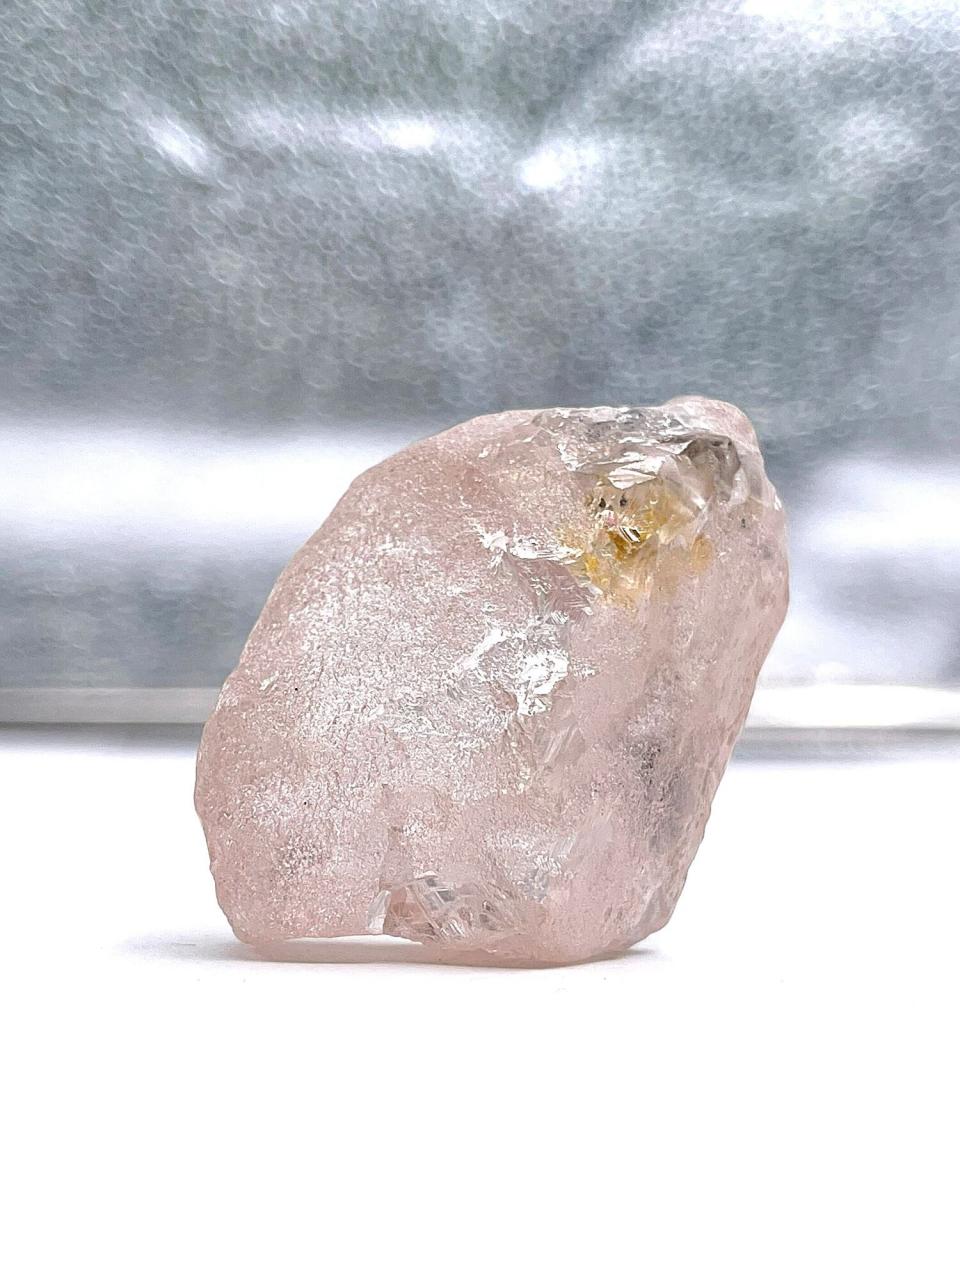 A handout photo made available by the Lucapa Diamond Company shows a 170 carat pink diamond recovered from Lulo, Angola 27 July 2022. A big pink diamond of 170 carats was discovered in Angola and is claimed to be the largest such gemstone found in 300 years. Called the Lulo Rose the diamond was found at the Lulo alluvial diamond mine in Angola according to the mine's owner, the Lucapa Diamond Company. 170 Carat pink diamond discovered, Luanda, Angola - 27 Jul 2022